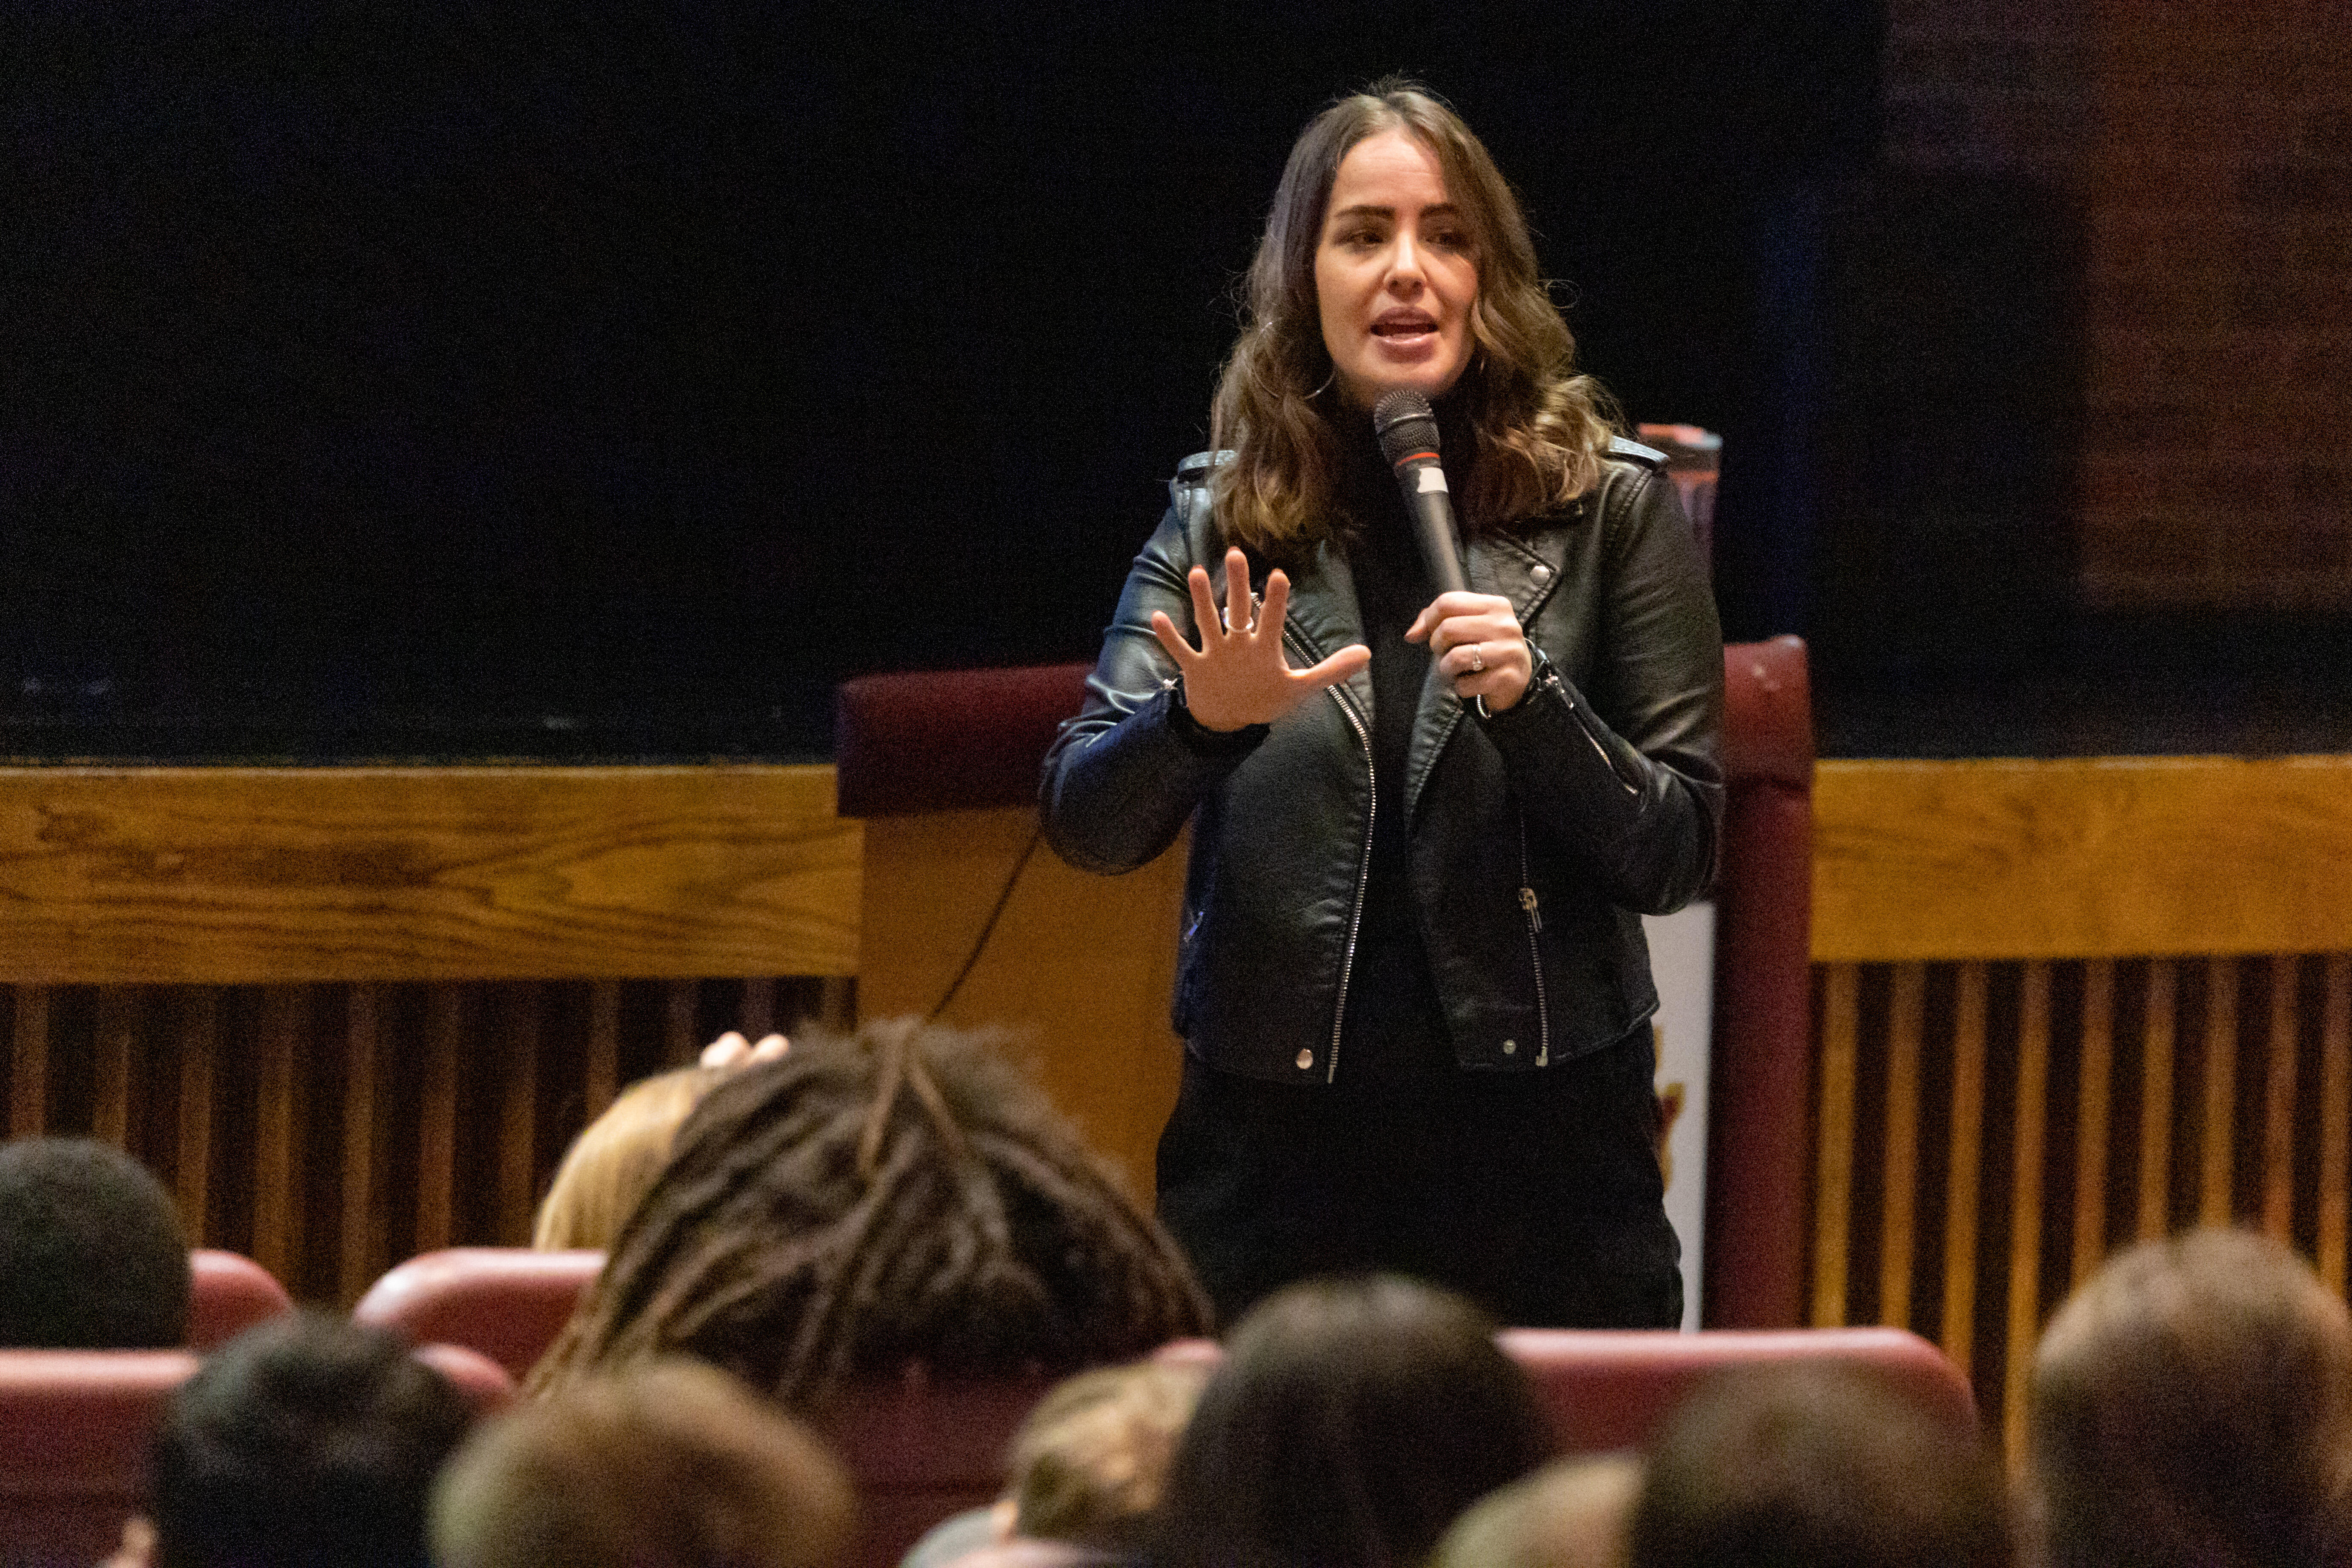 Jordan Corcoran shares her mental health advocacy with Steel Valley students 